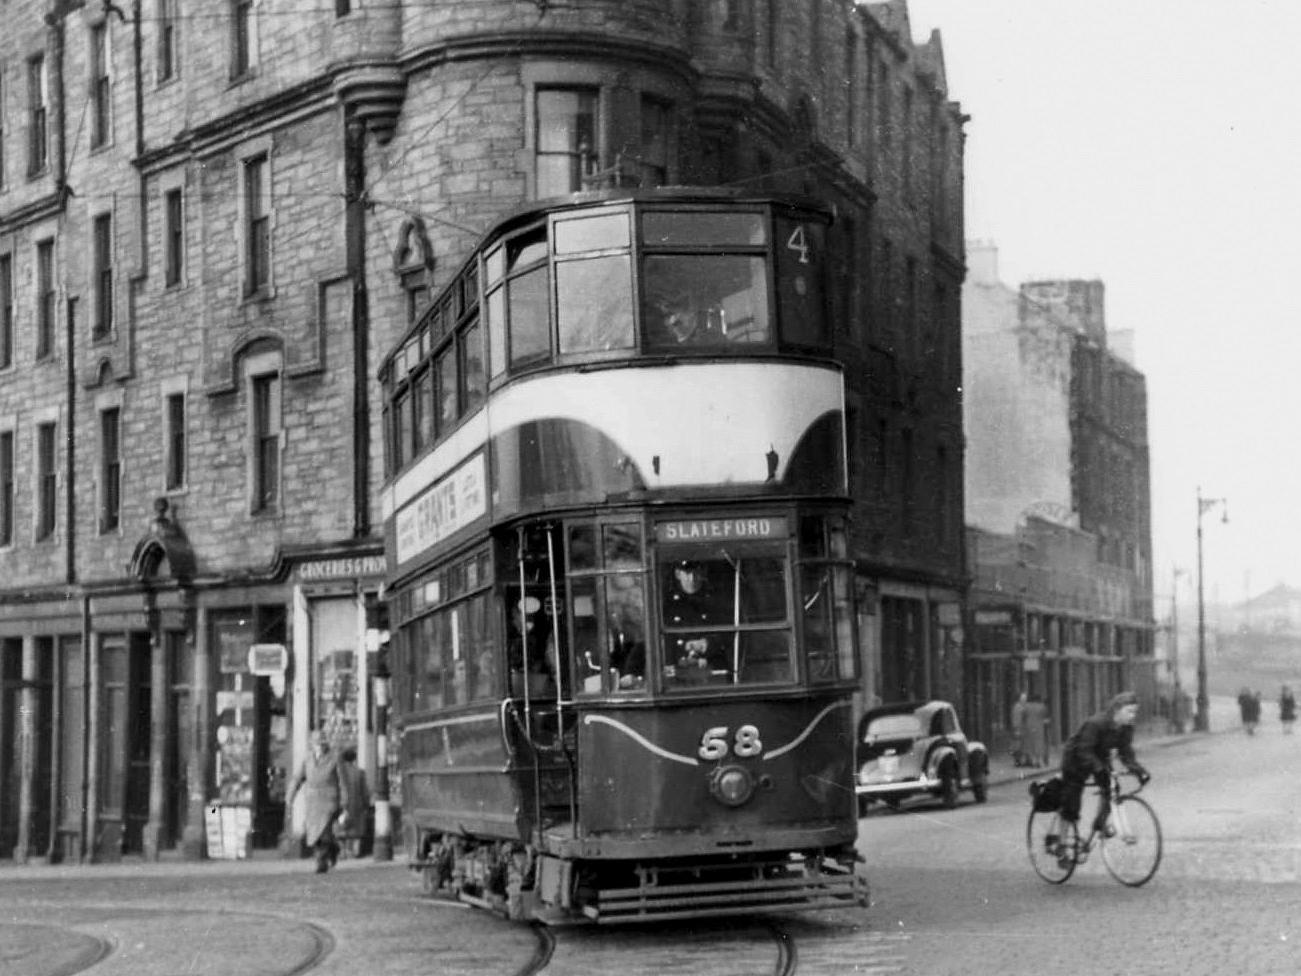 Turning into Slateford Road at Ardmillan Terrace, Tram 58 trundles by a typical Edinburgh street scene of the Fifties, complete with cyclist keeping well clear of the tram lines.